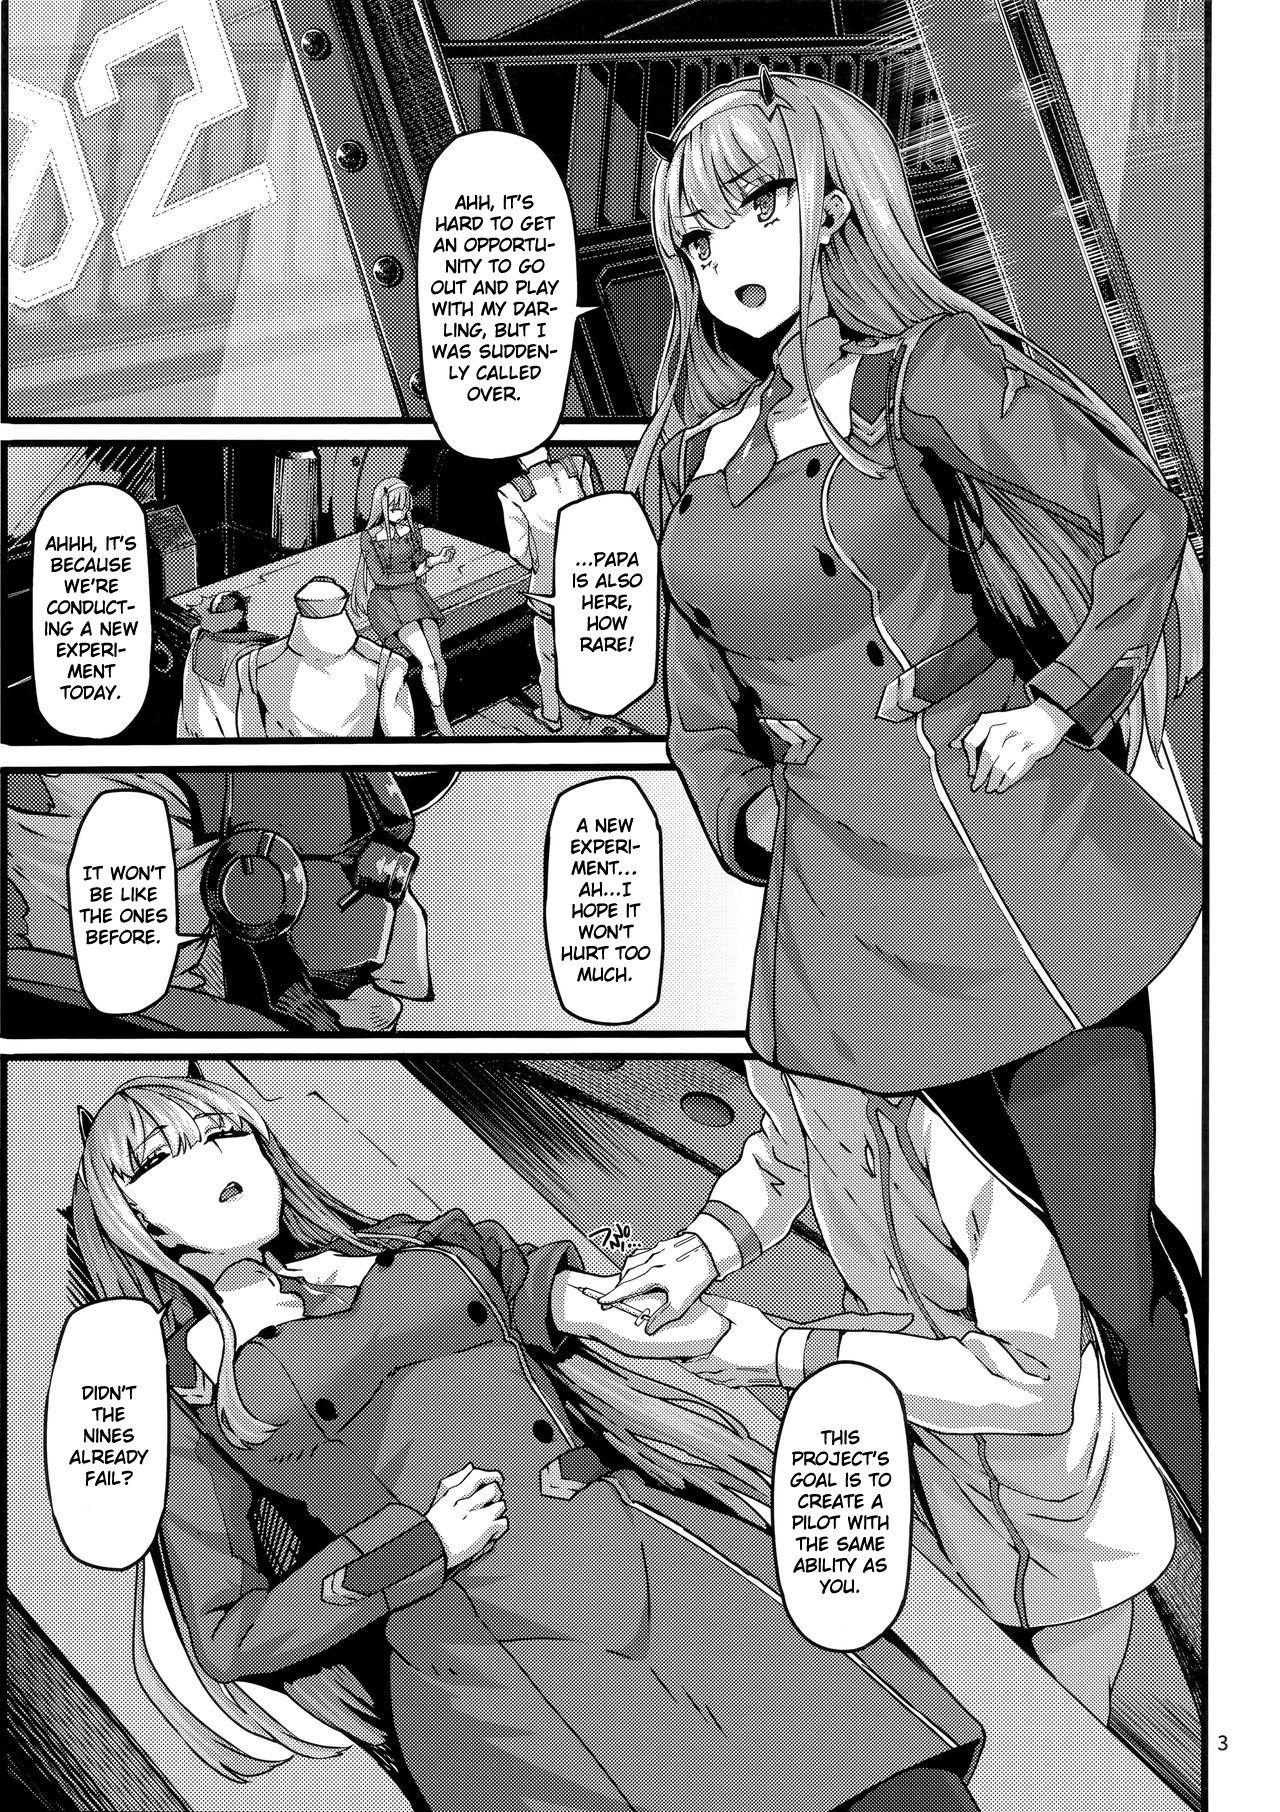 Pussyfucking reginae - Darling in the franxx Penetration - Page 2